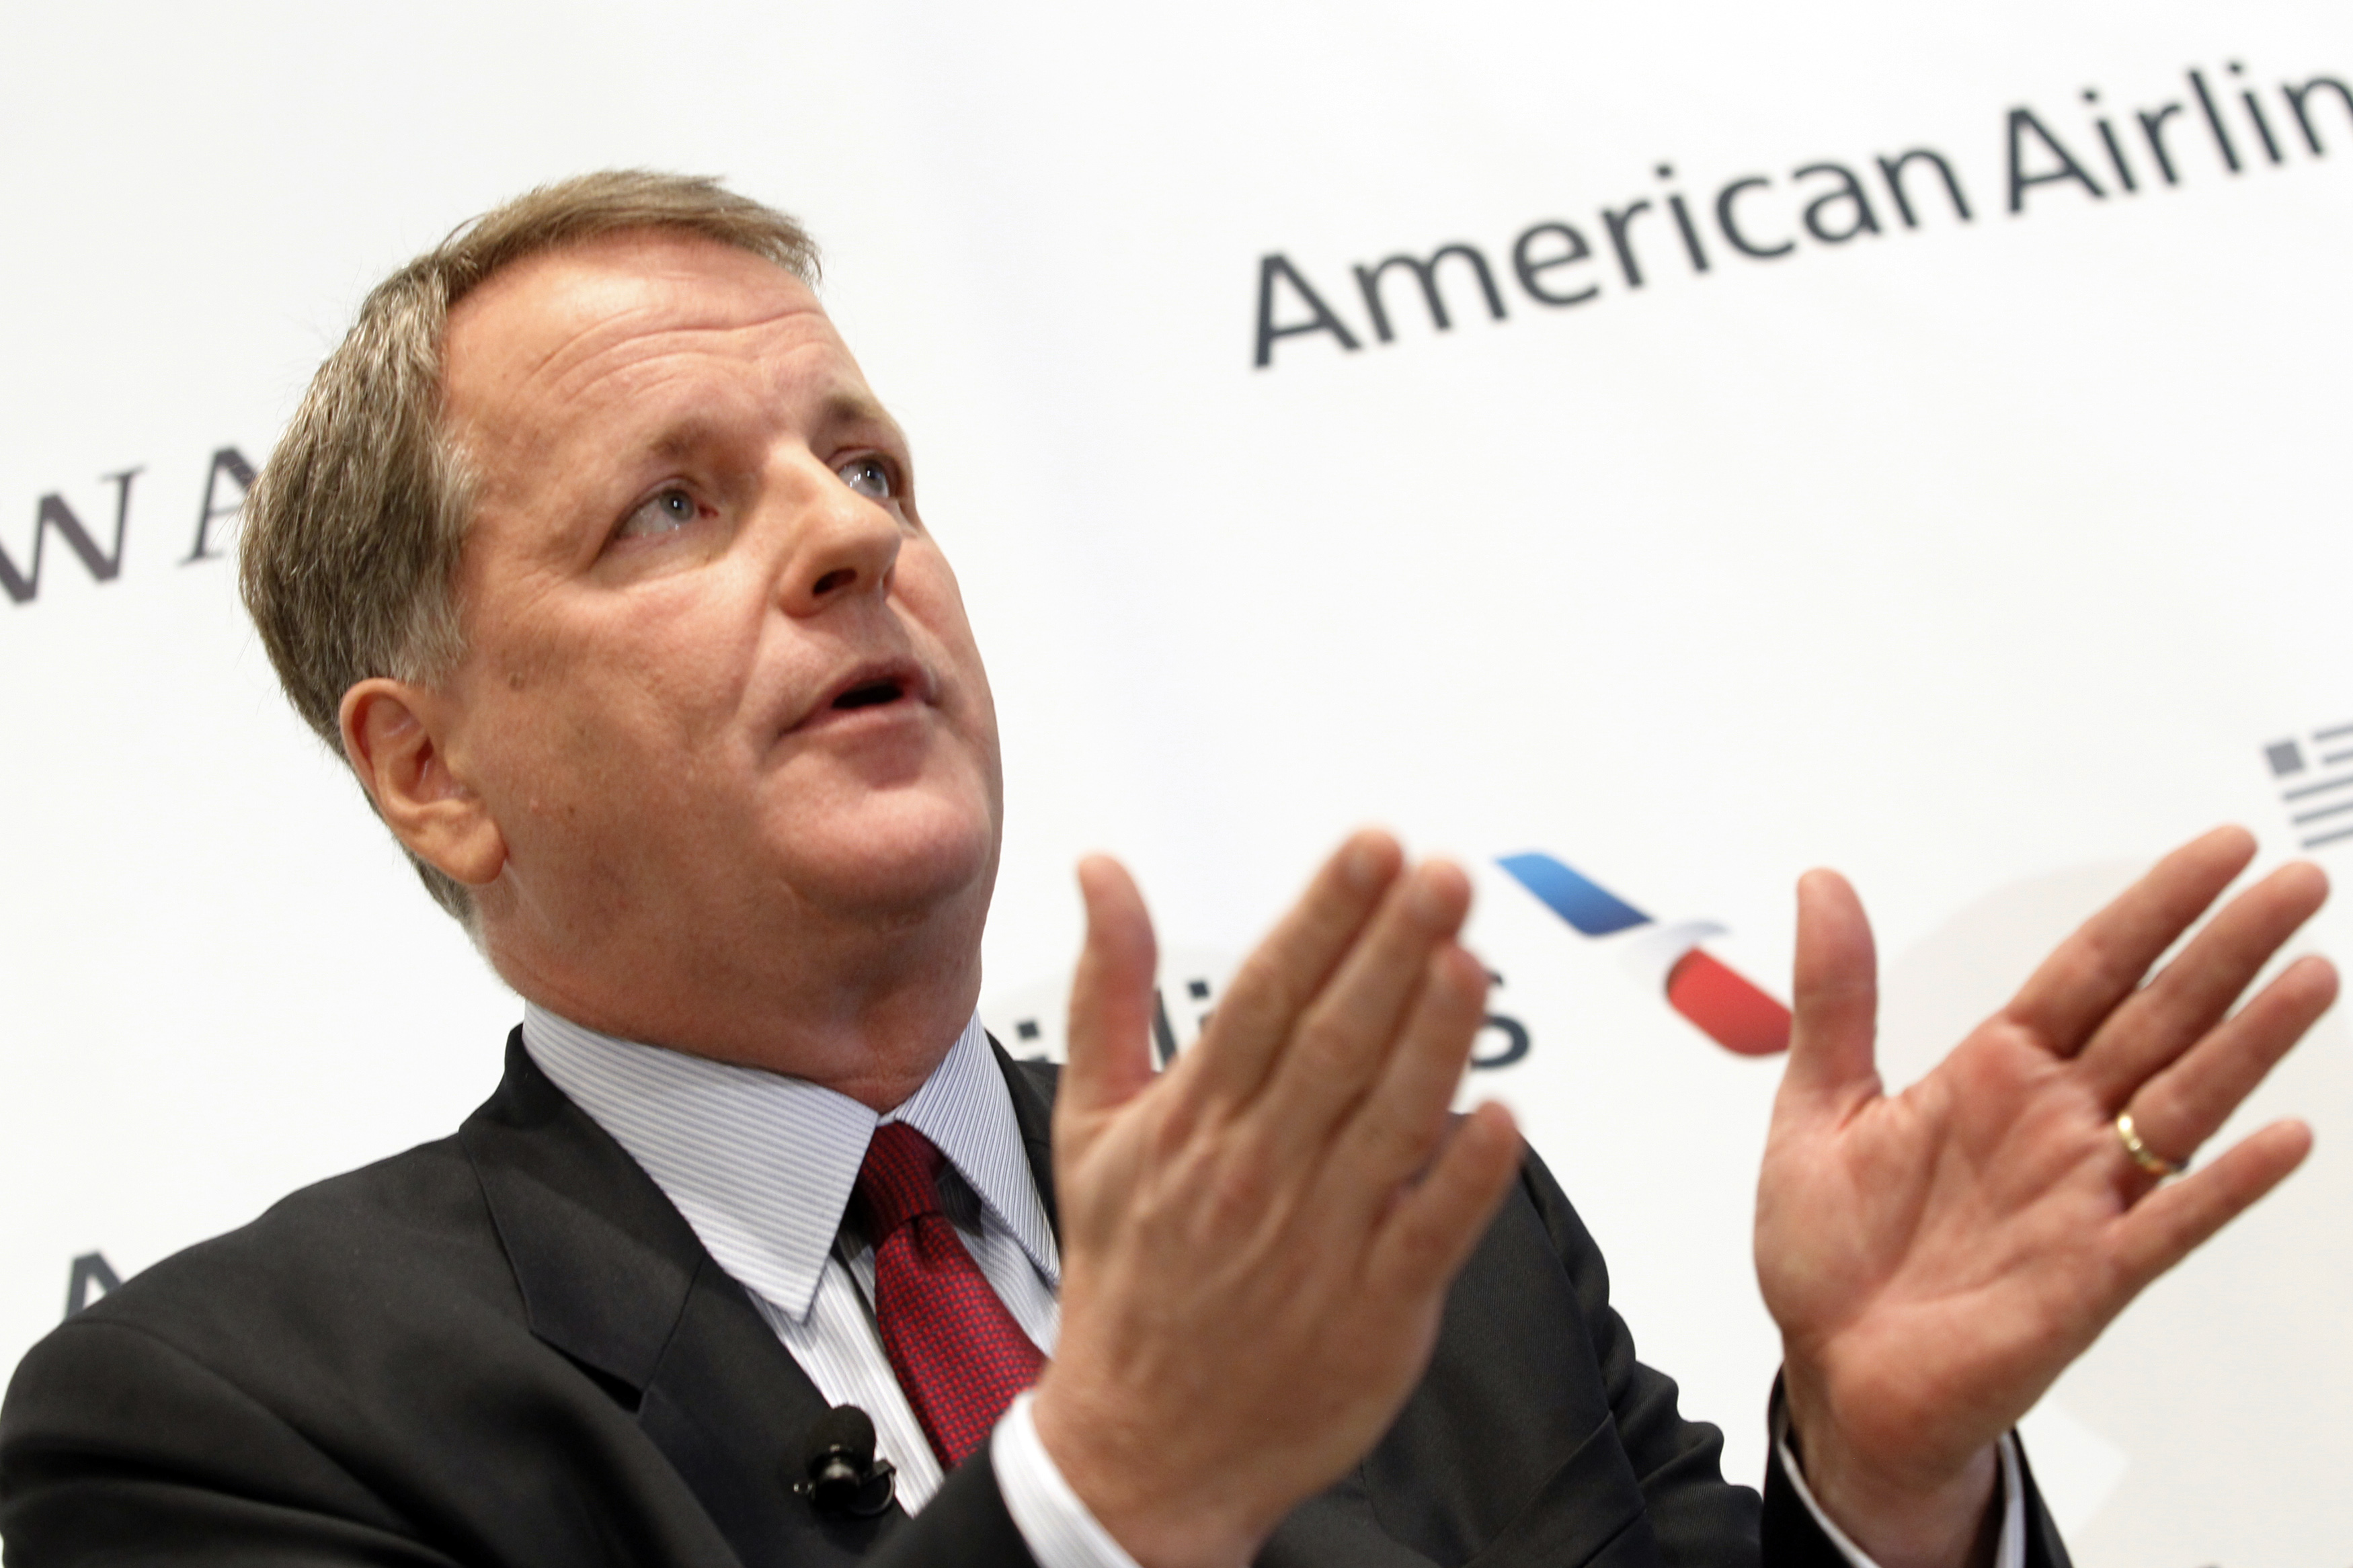 U.S. Airways CEO Doug Parker announces the planned merger of AMR Corp, the parent of American Airlines in Dallas